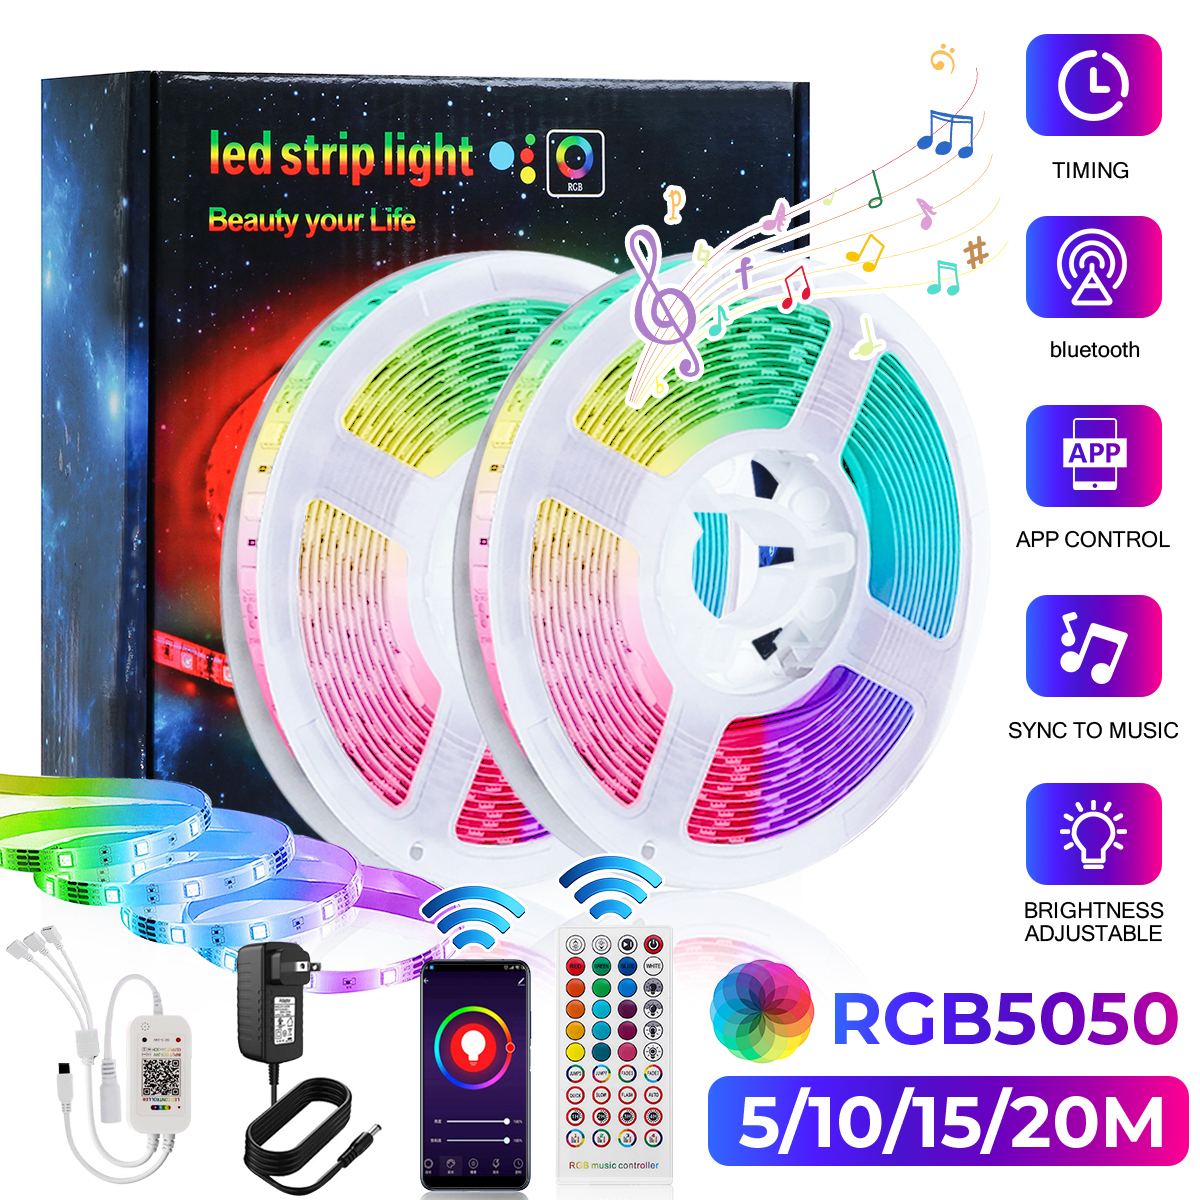 5101520M-RGB-LED-Light-Strip-with-40Key-Remote-Control-Cuttable-Party-Christmas-18LED1M-1837716-2